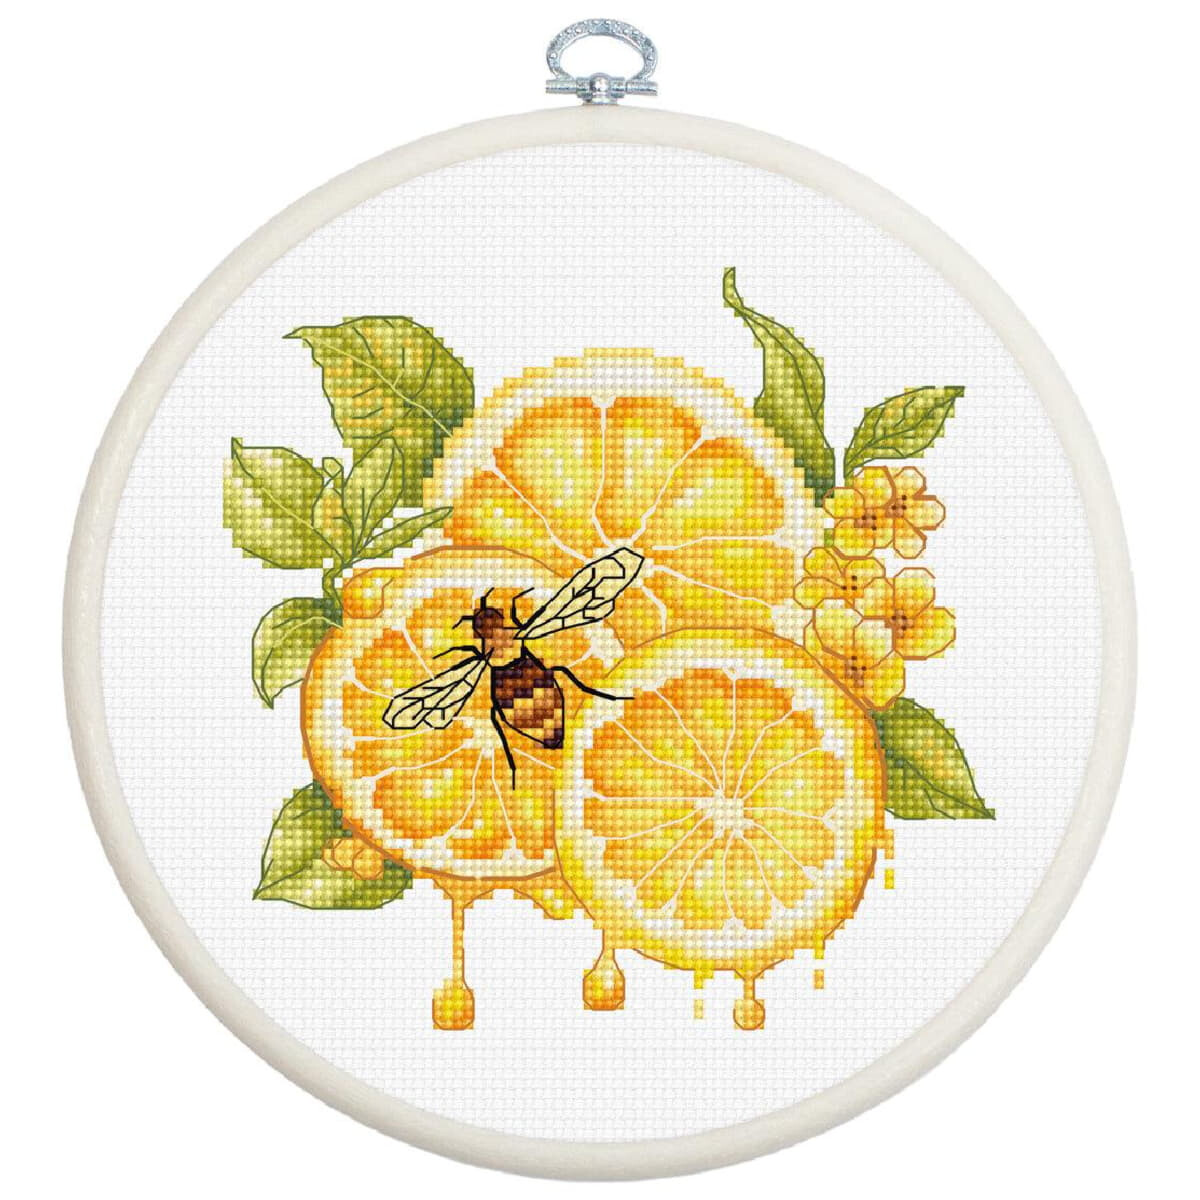 Luca-S counted cross stitch kit with hoop "The Lemon...